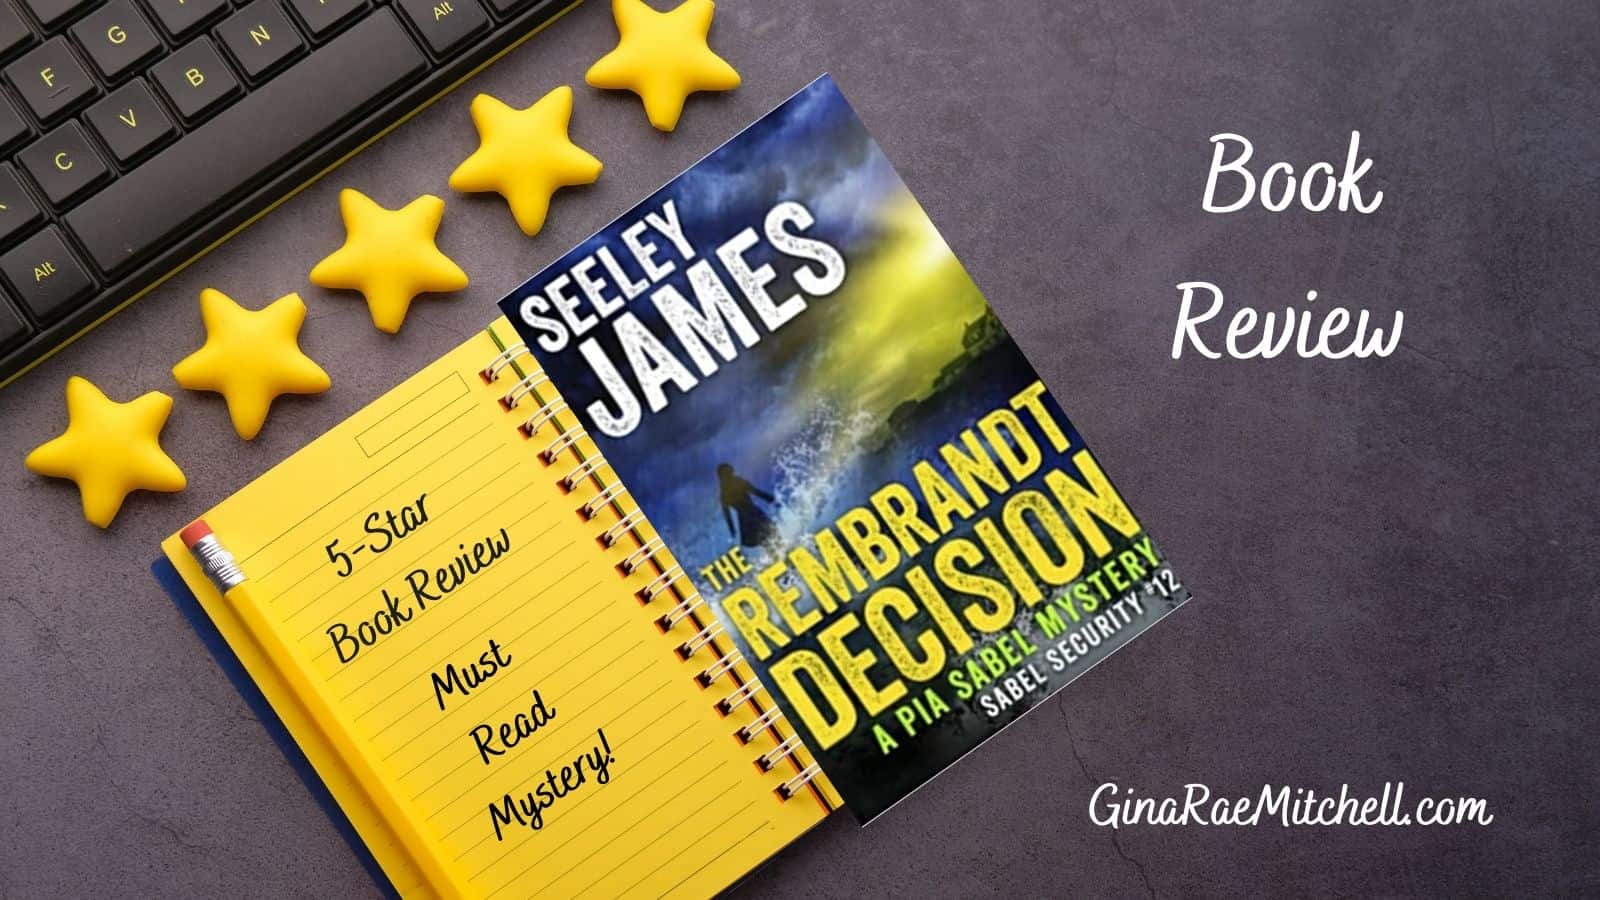 The Rembrandt Decision (A Pia Sabel Mystery - Sabel Security) by Seeley James | 5-Star Review, Book & Author Info 